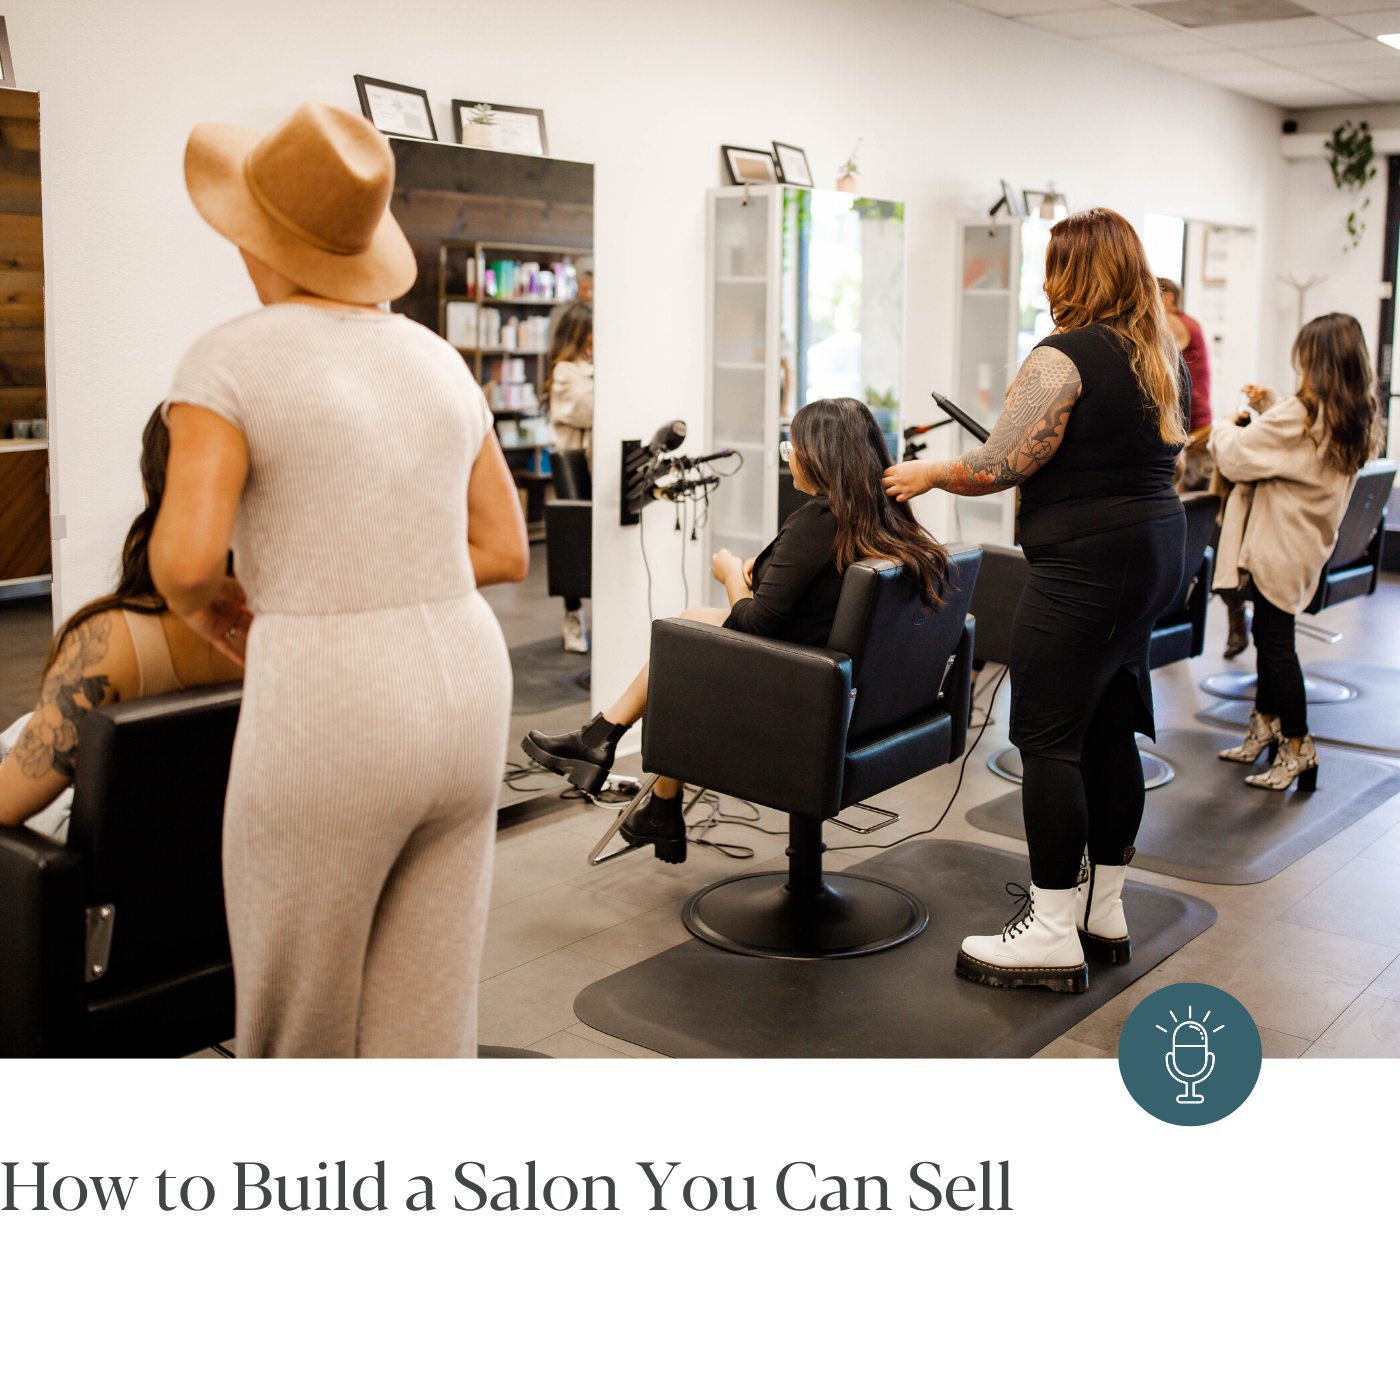 Episode #277 - How to Build a Salon You Can Sell